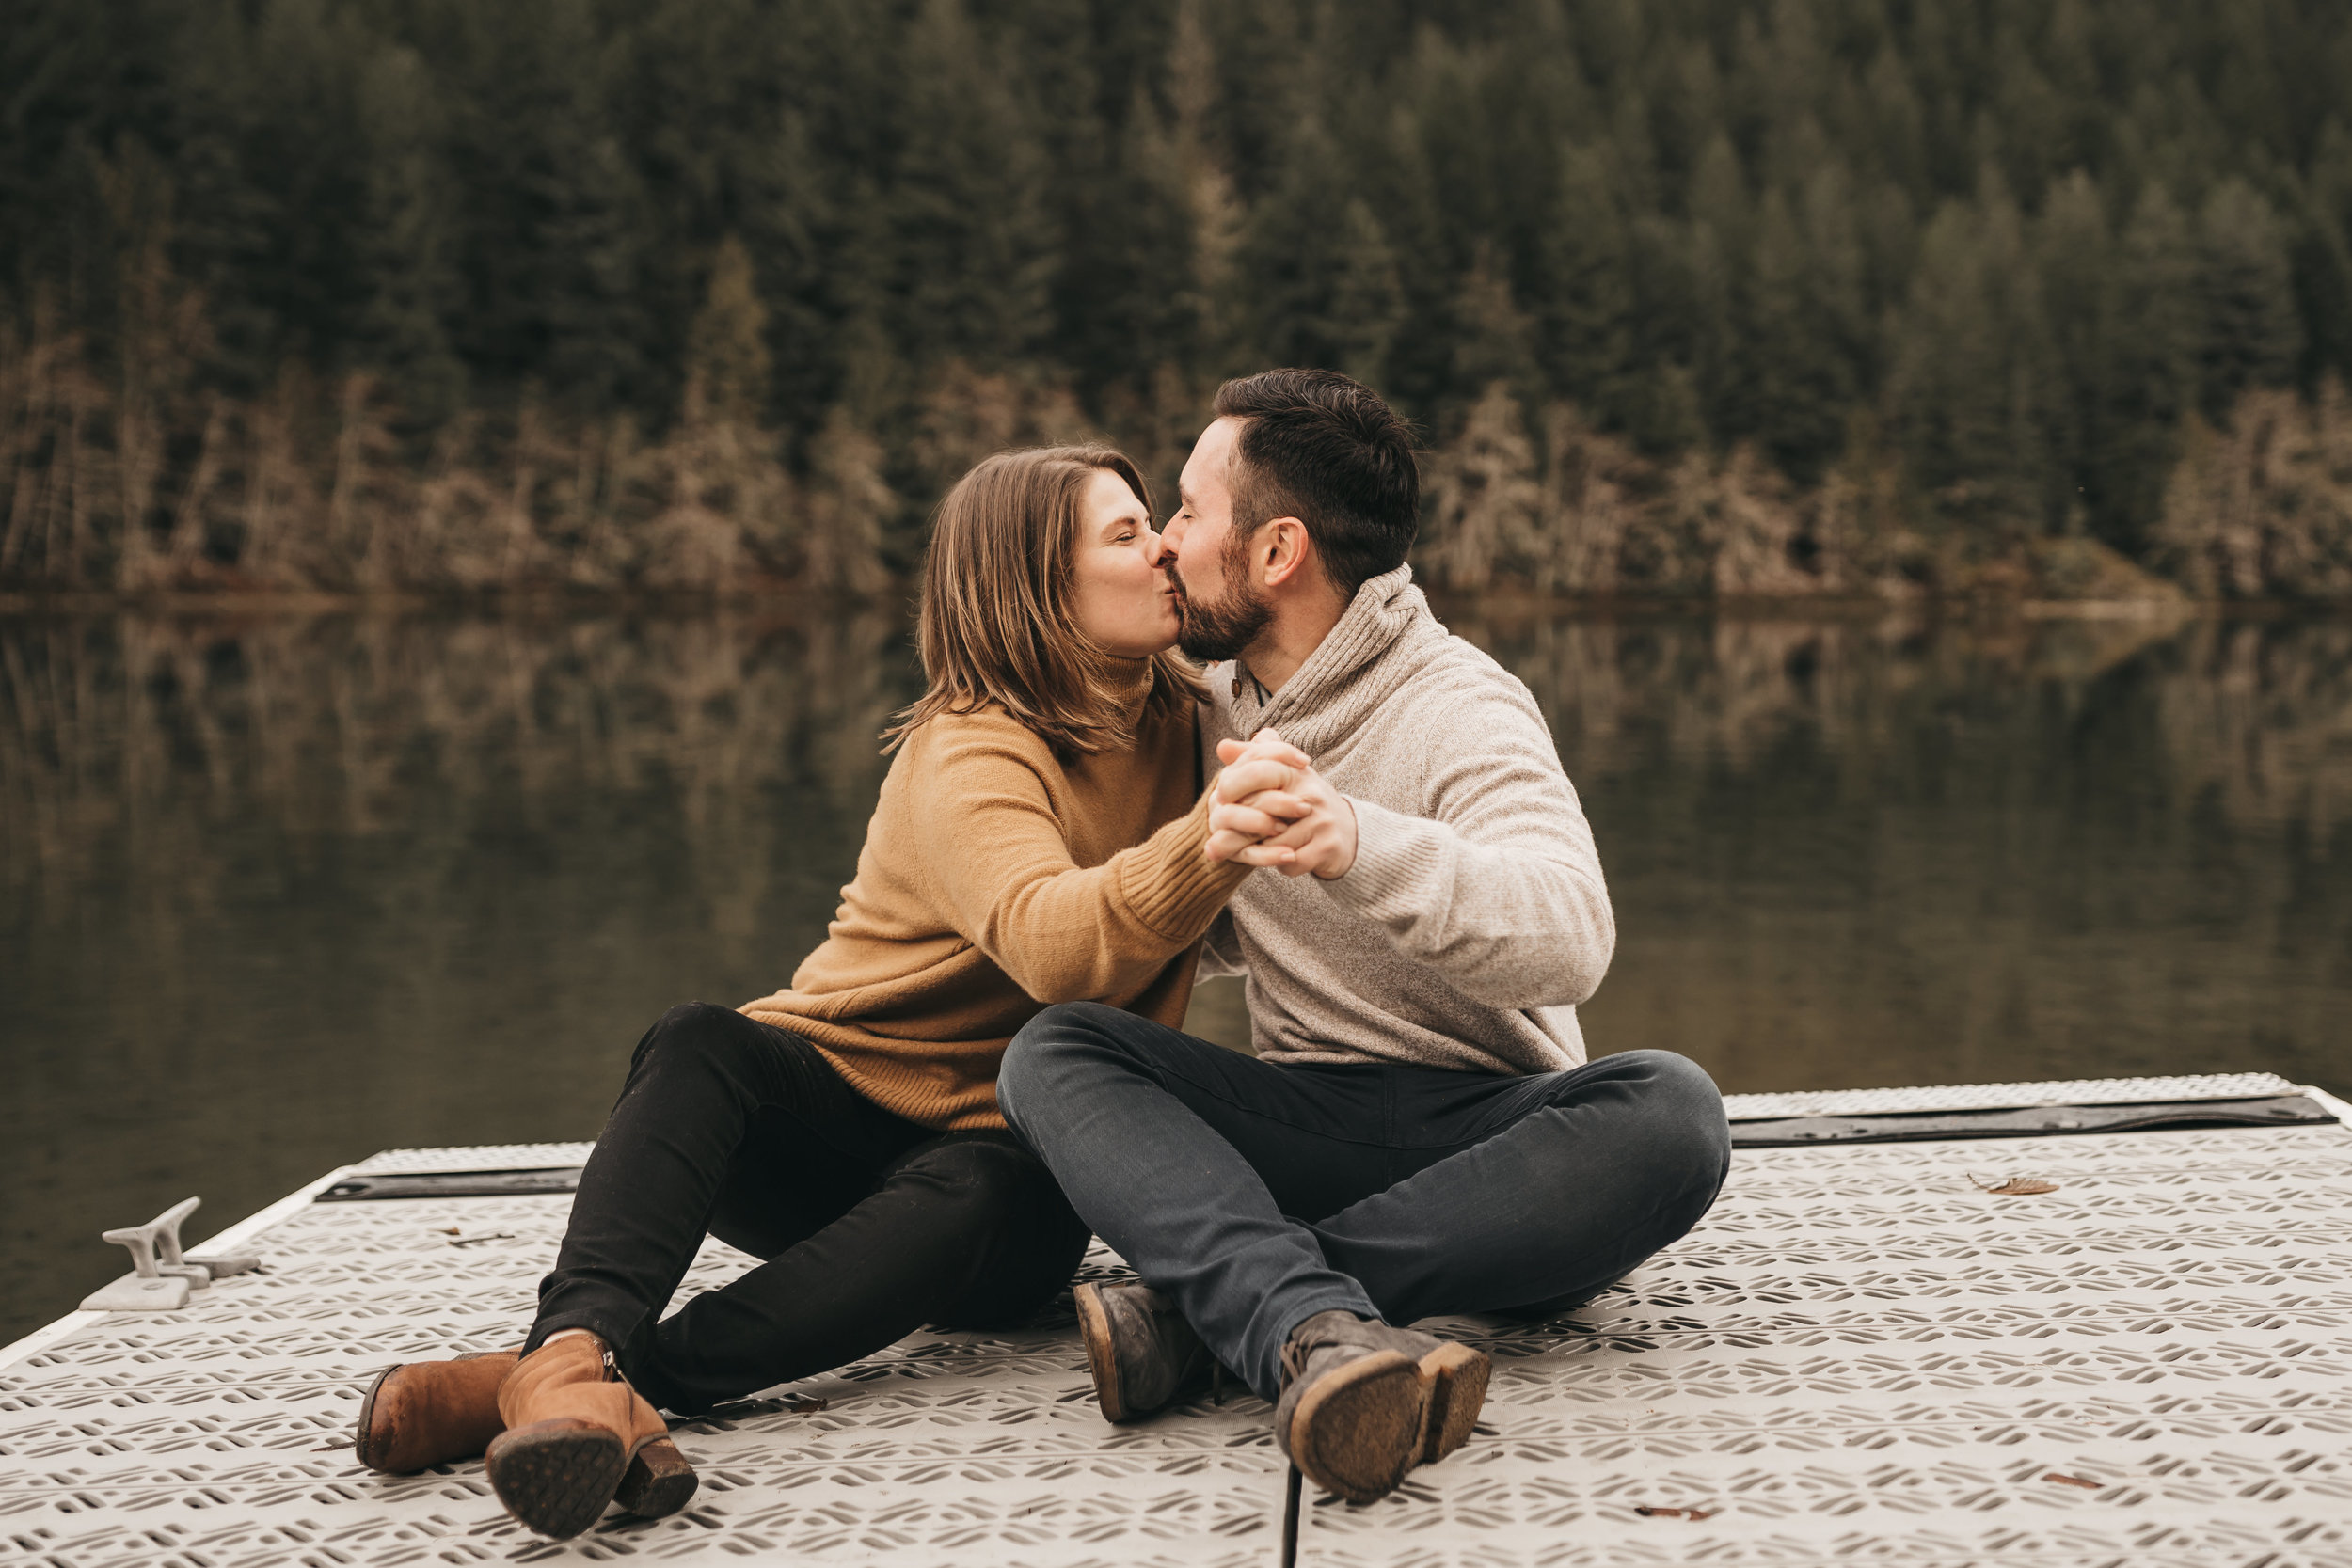 Diablo Lake Engagement Session- North Cascades National Park. Between the Pine- Seattle, WA. Wedding and Elopement Photographer 